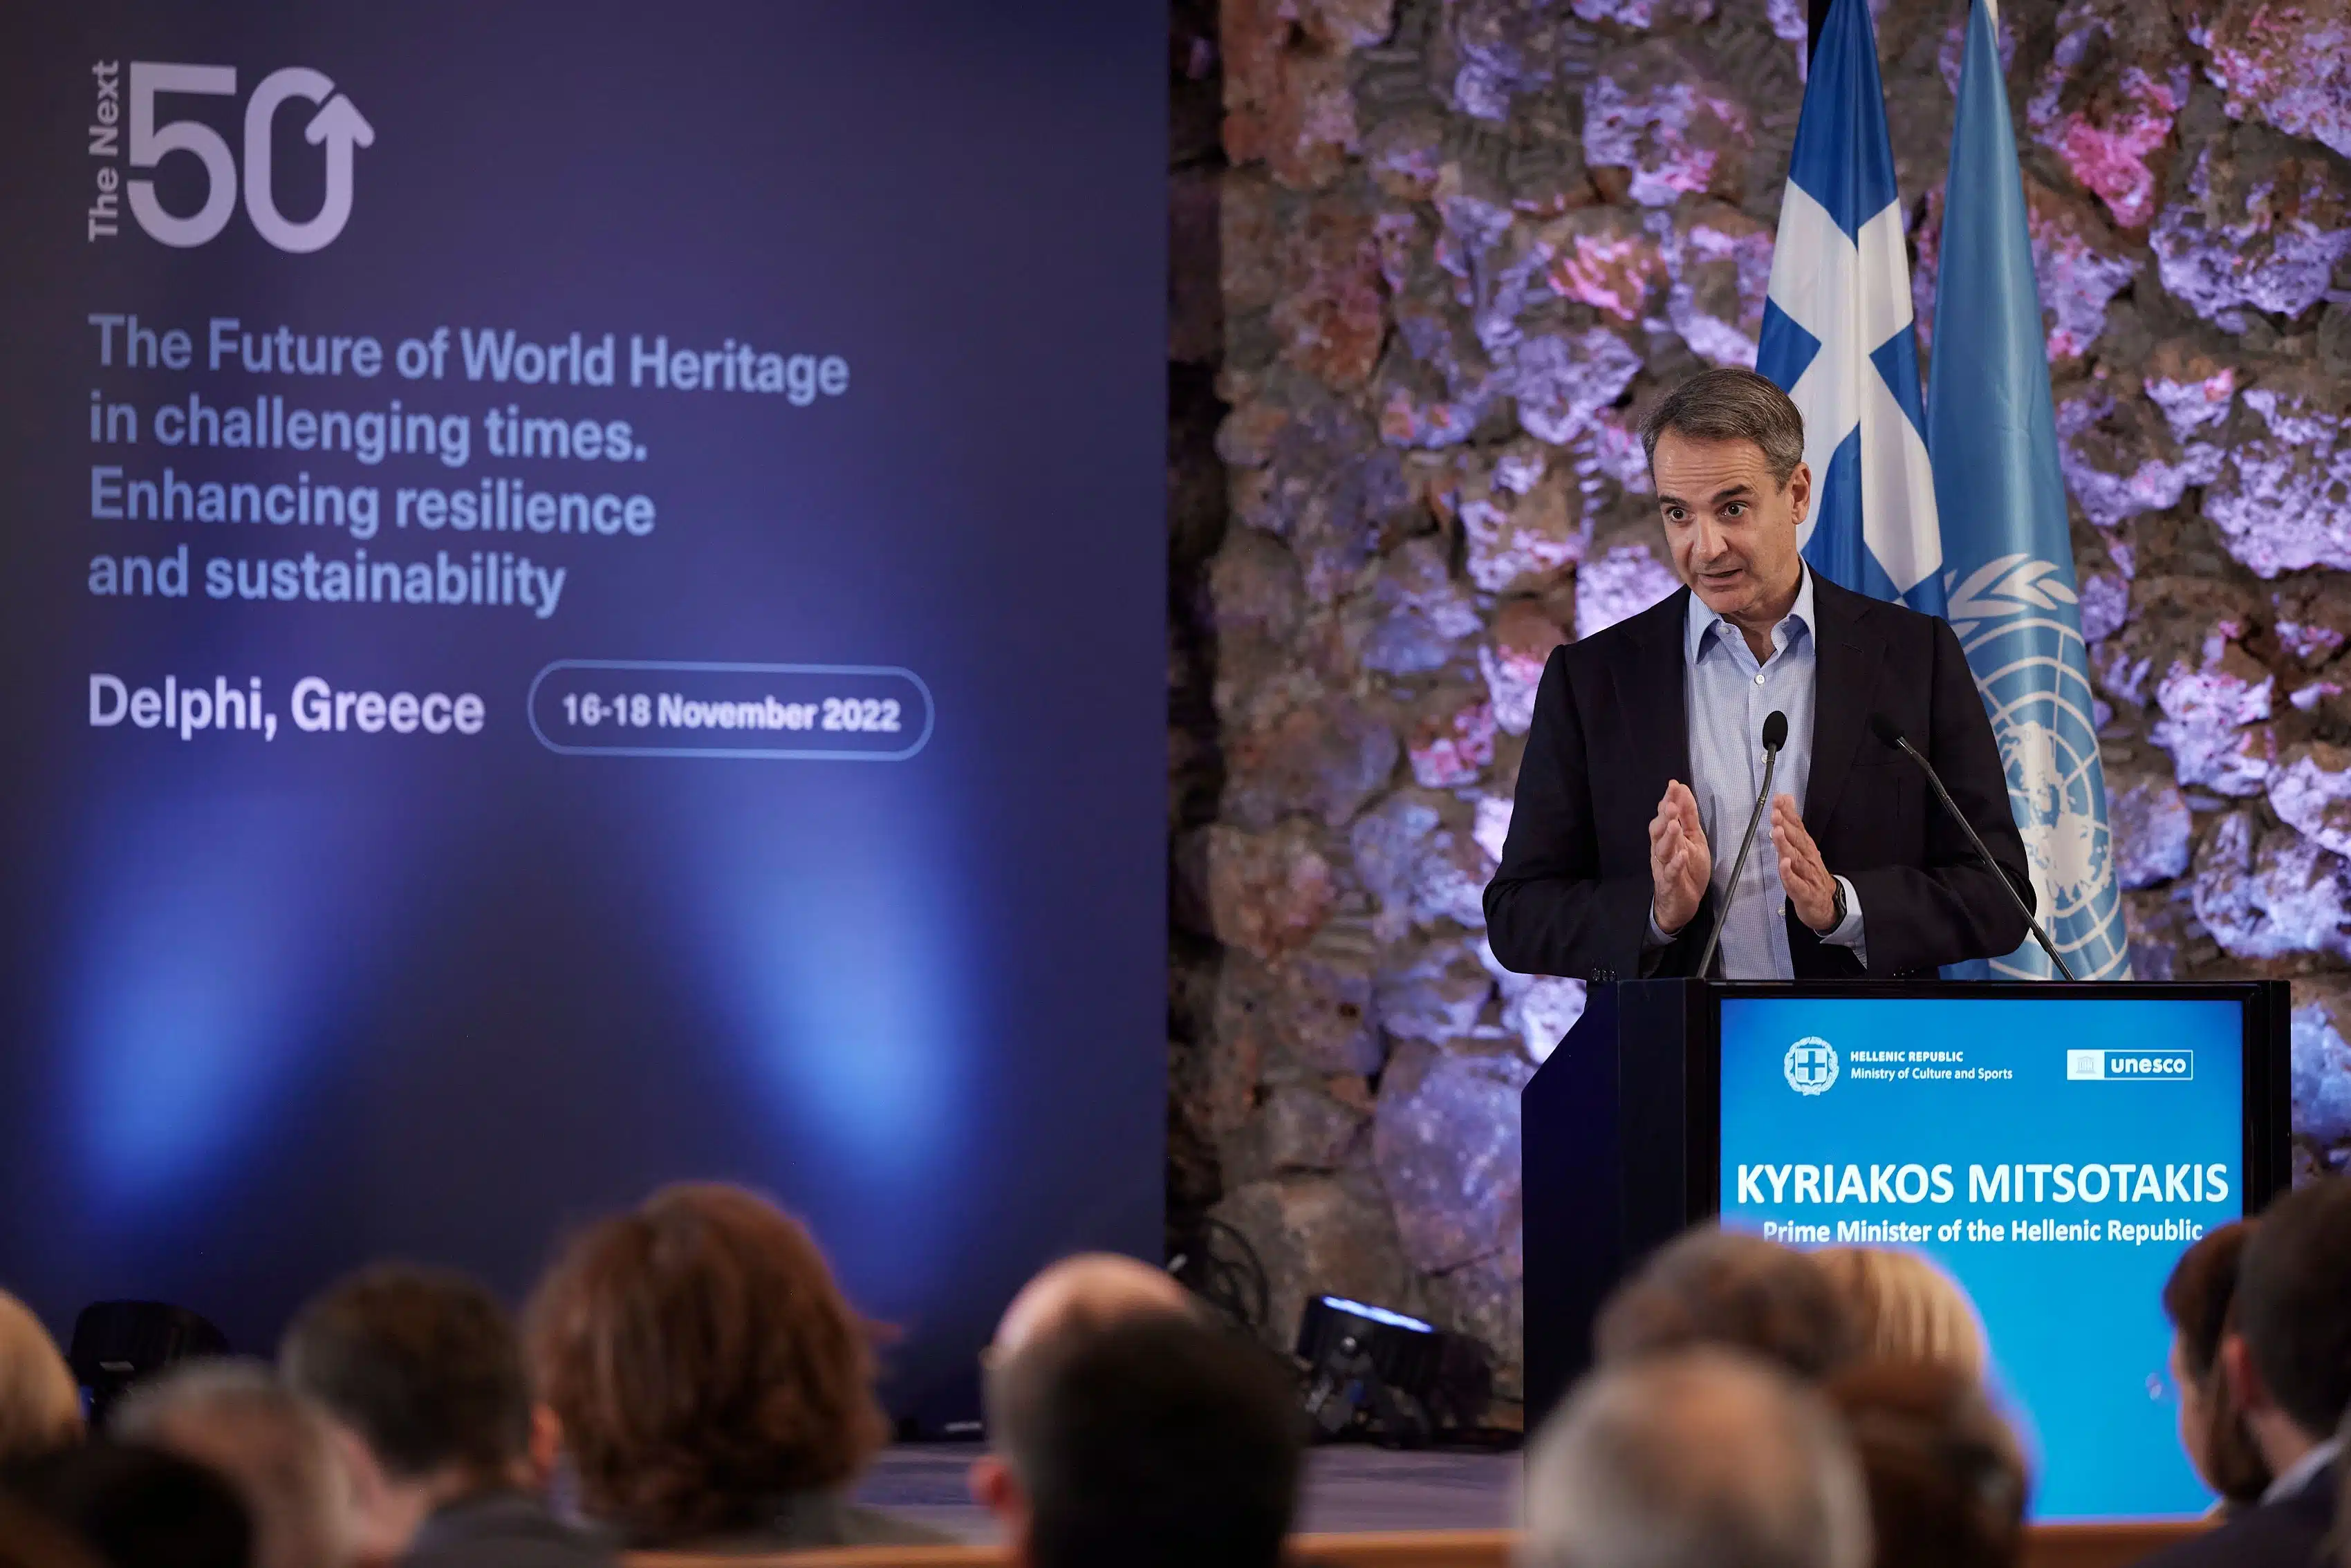 Greek Prime Minister MItsotakis at UNESCO Conference in Delphi